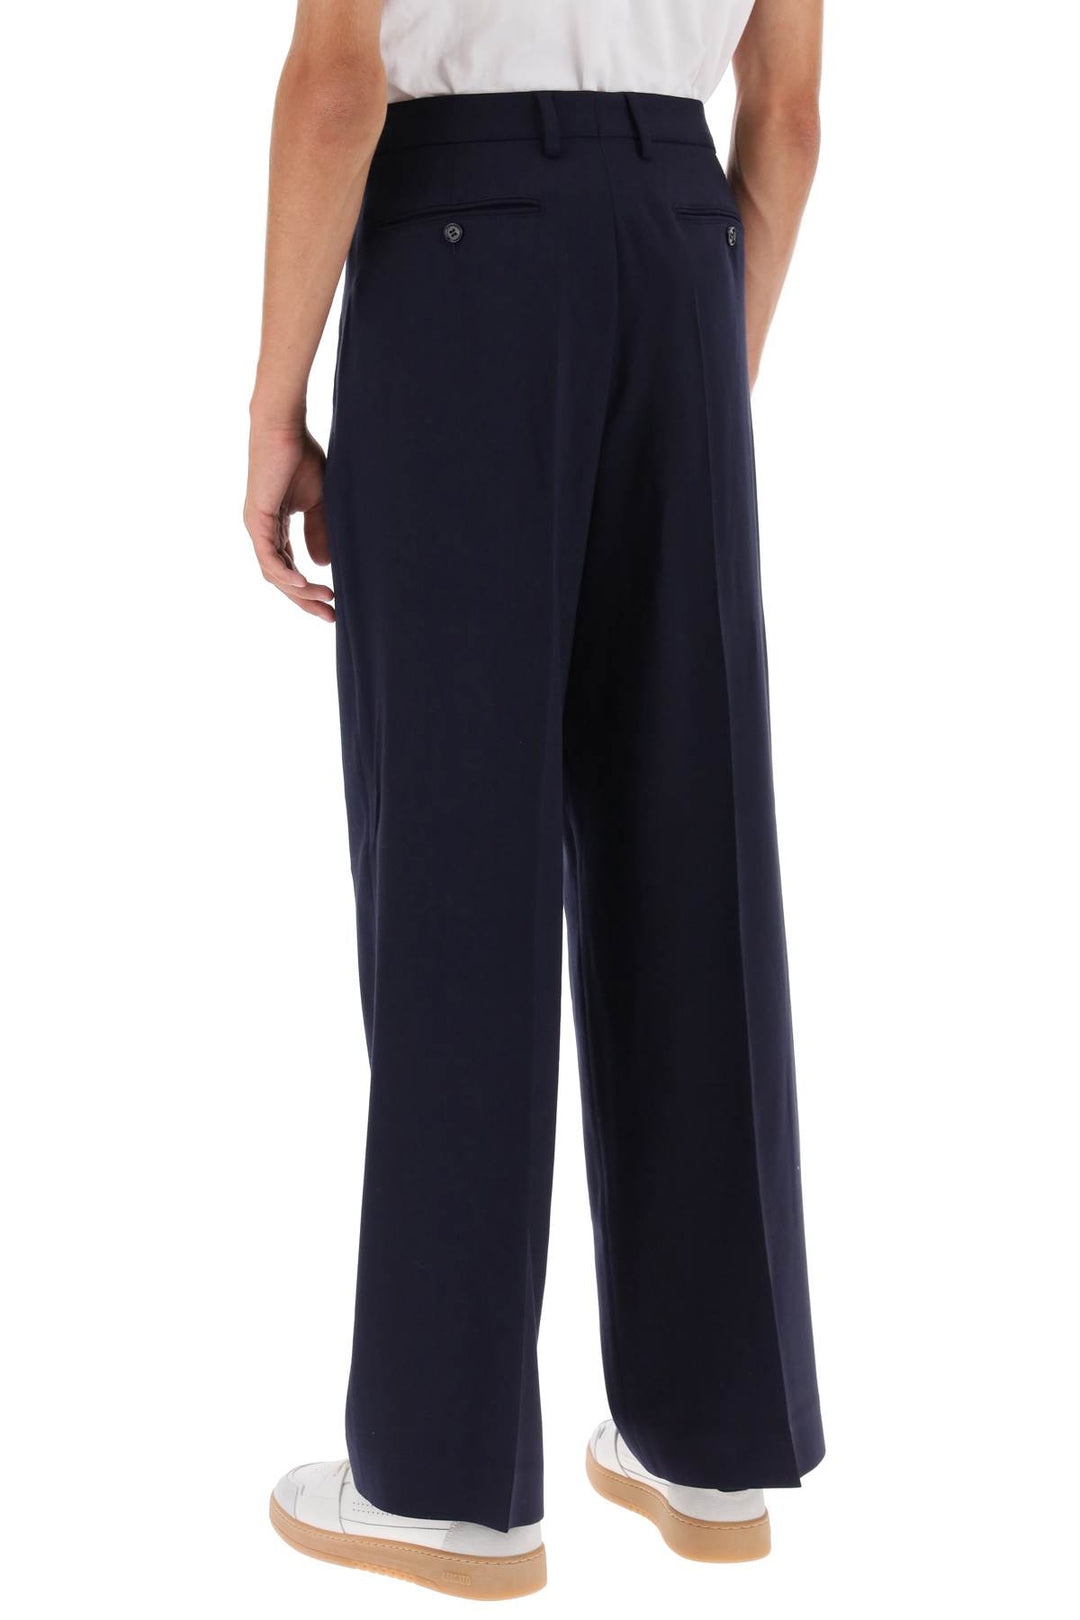 Ami paris loose fit pants with straight cut-2